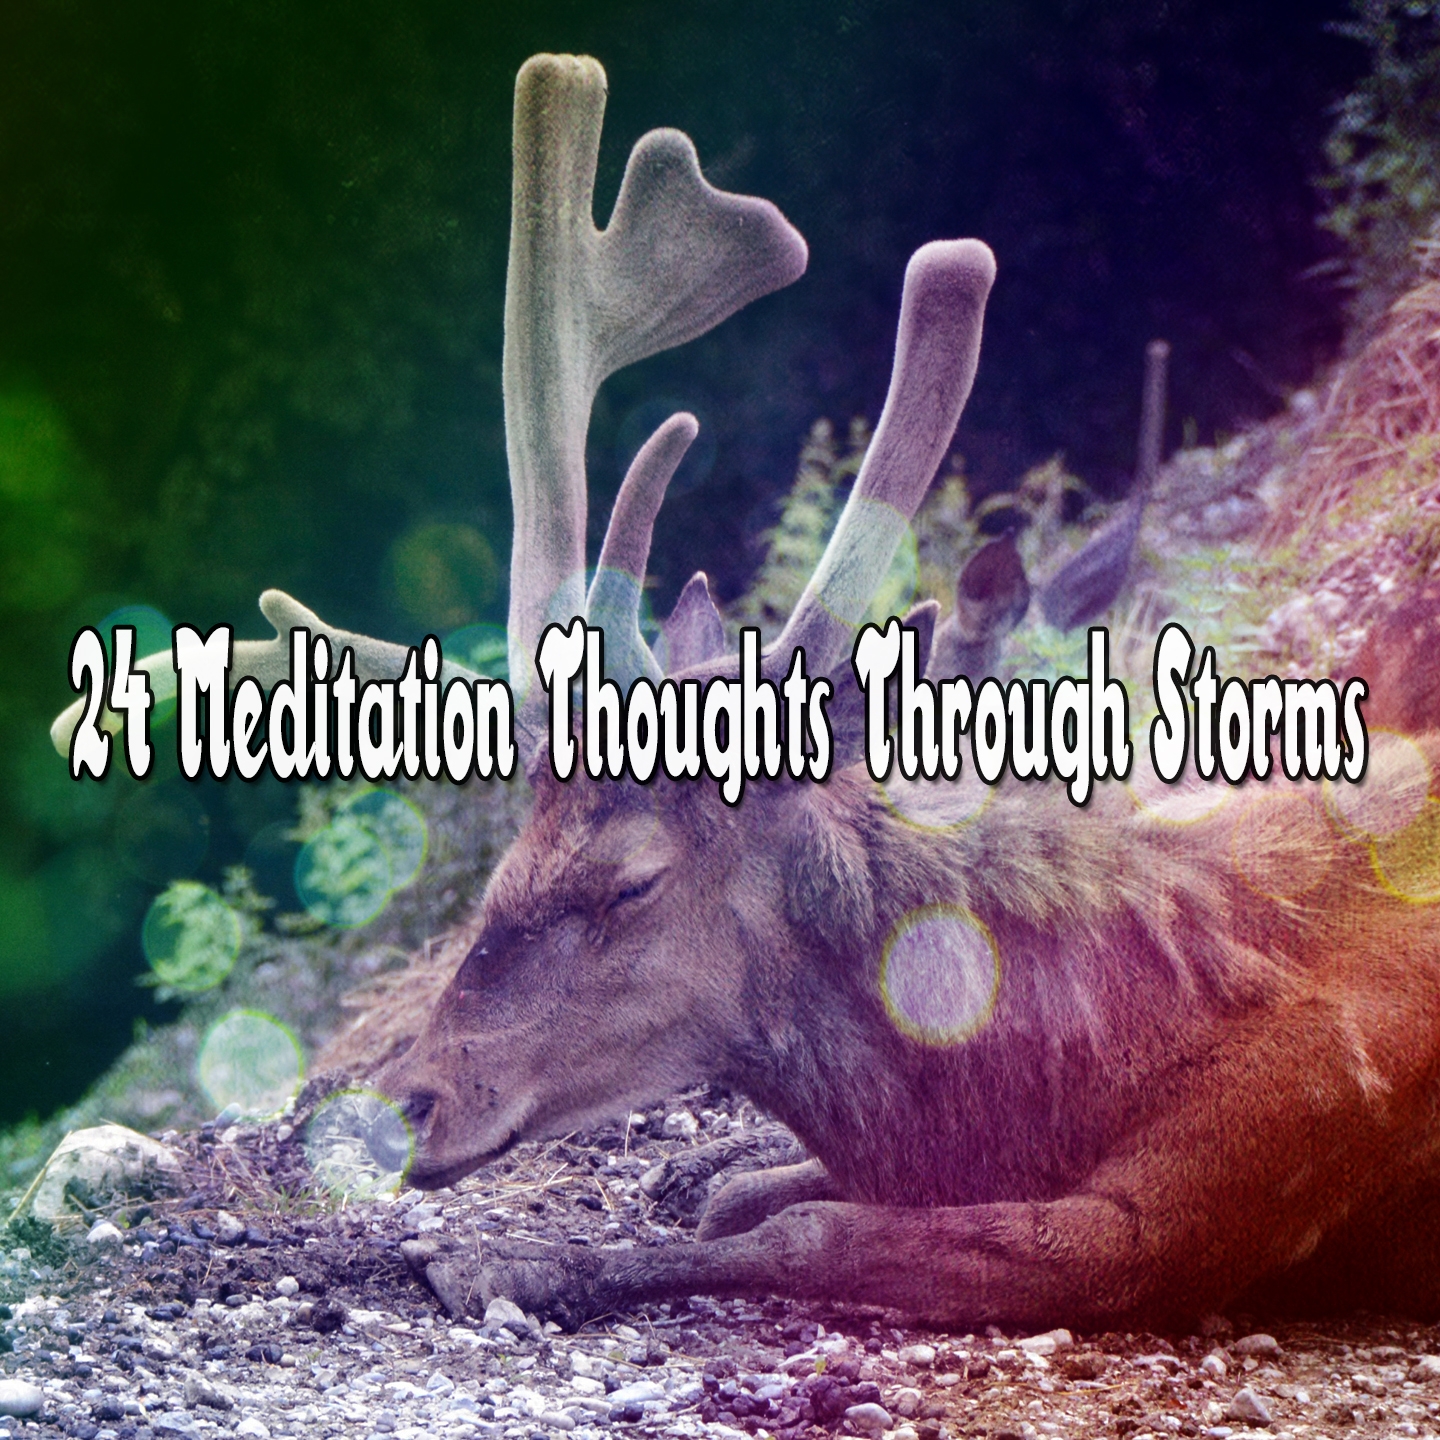 24 Meditation Thoughts Through Storms